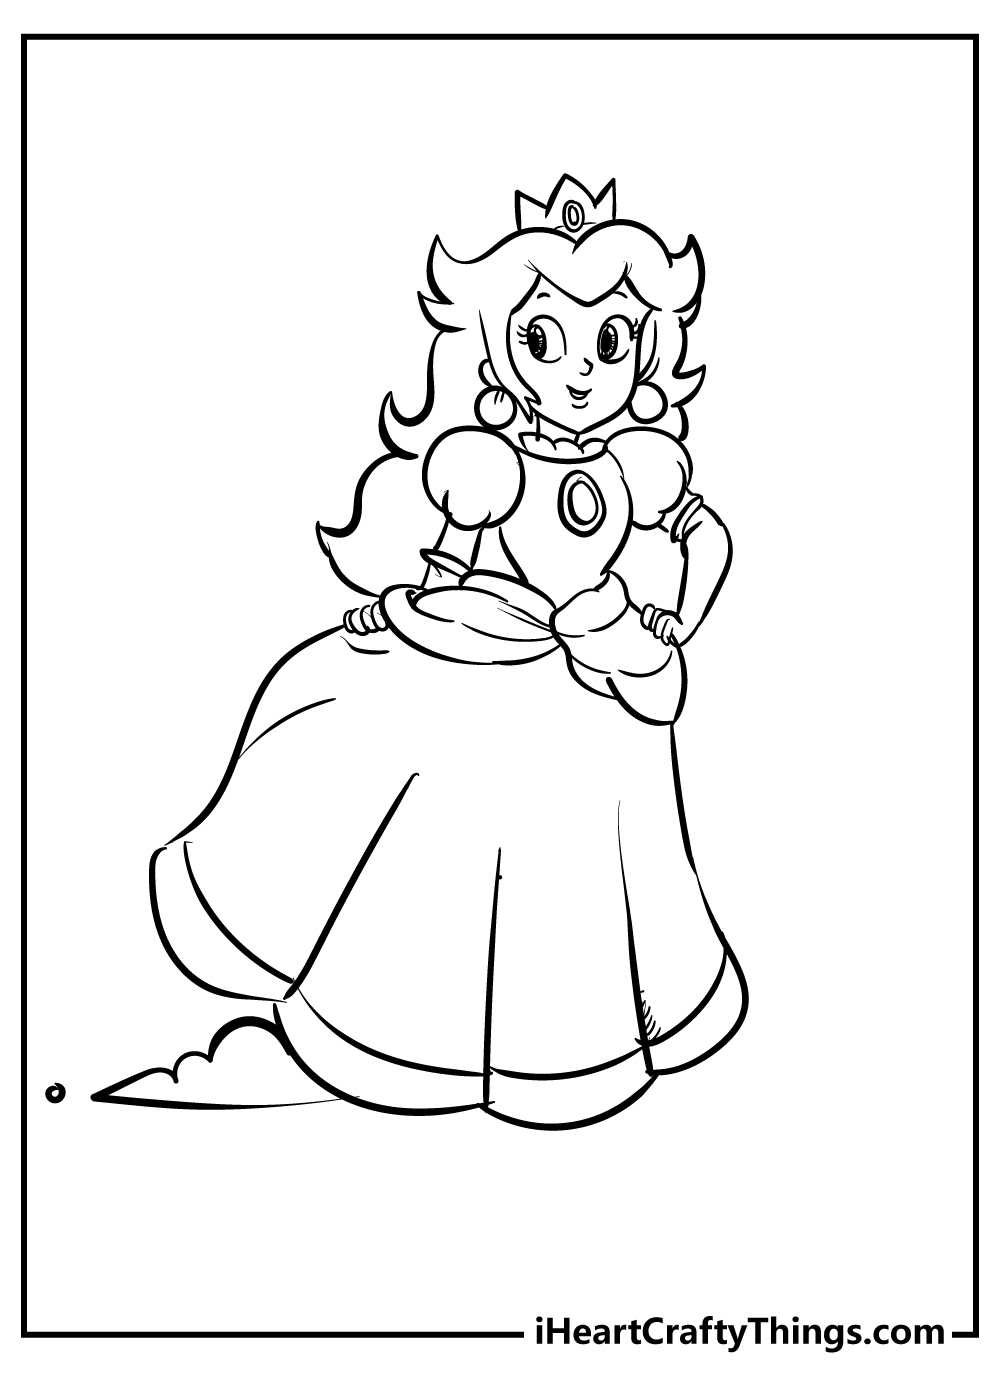 Printable Princess Peach Coloring Pages Updated 20